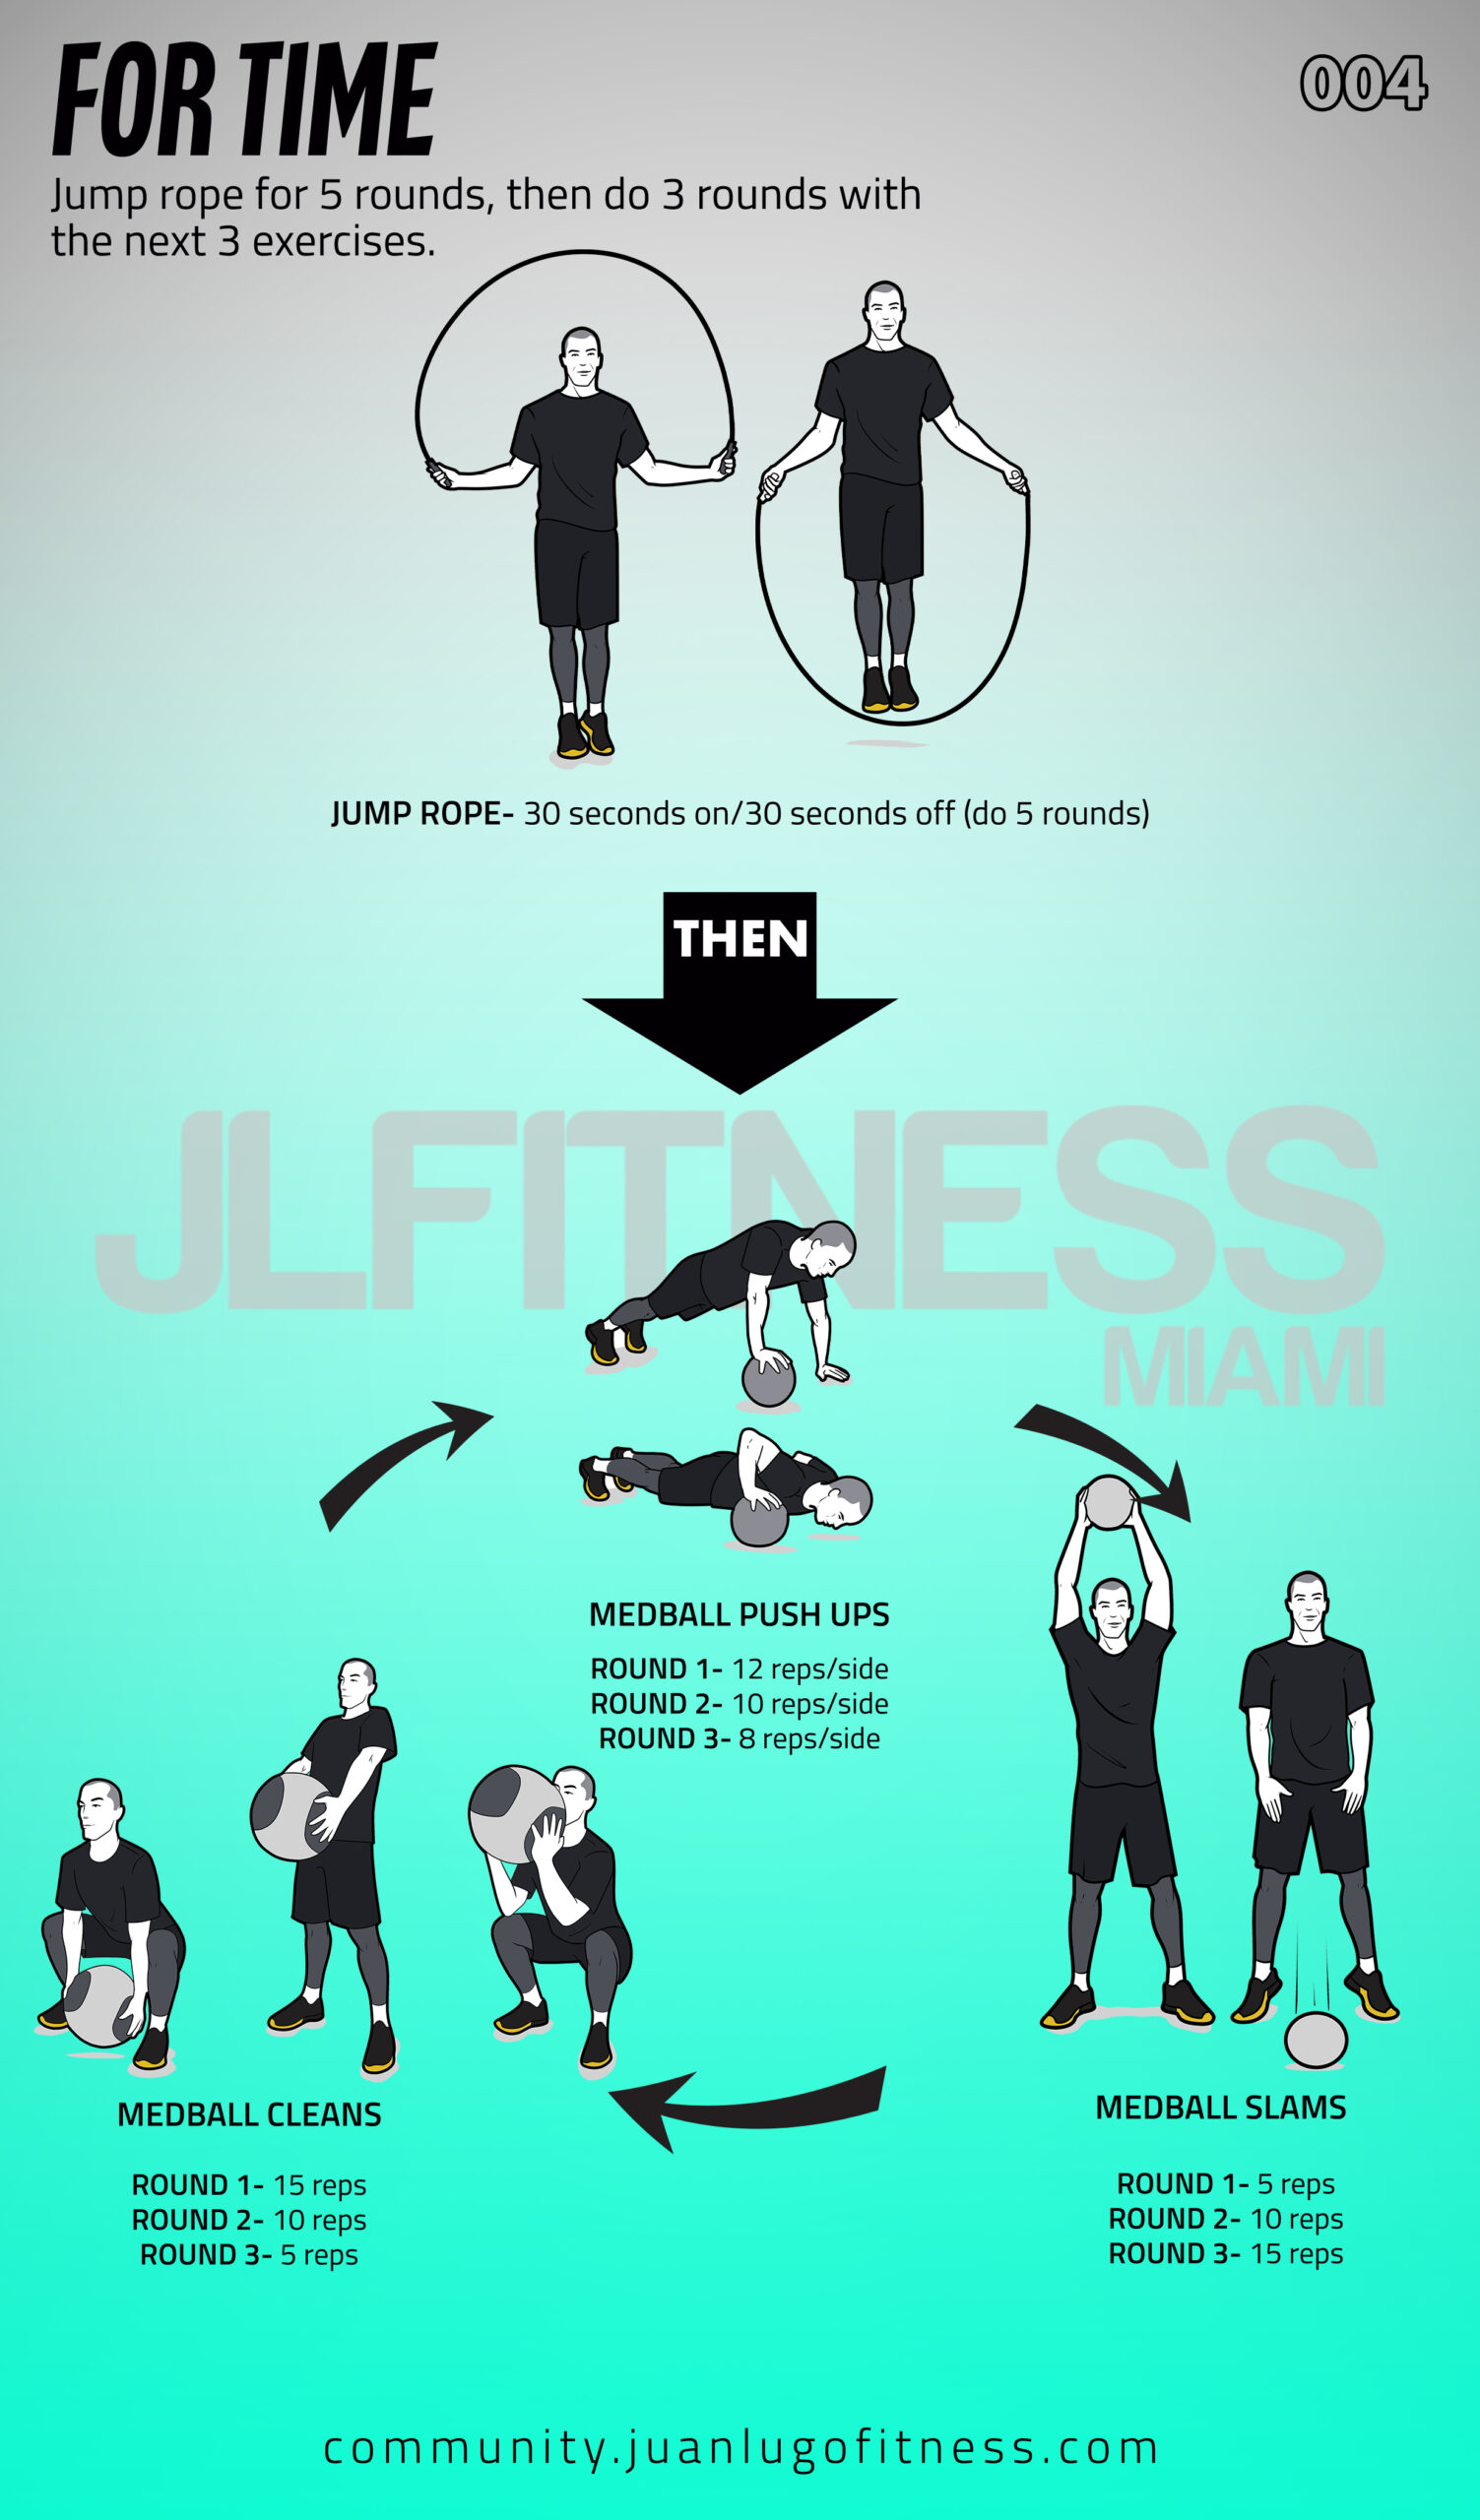 jump rope and medball workout